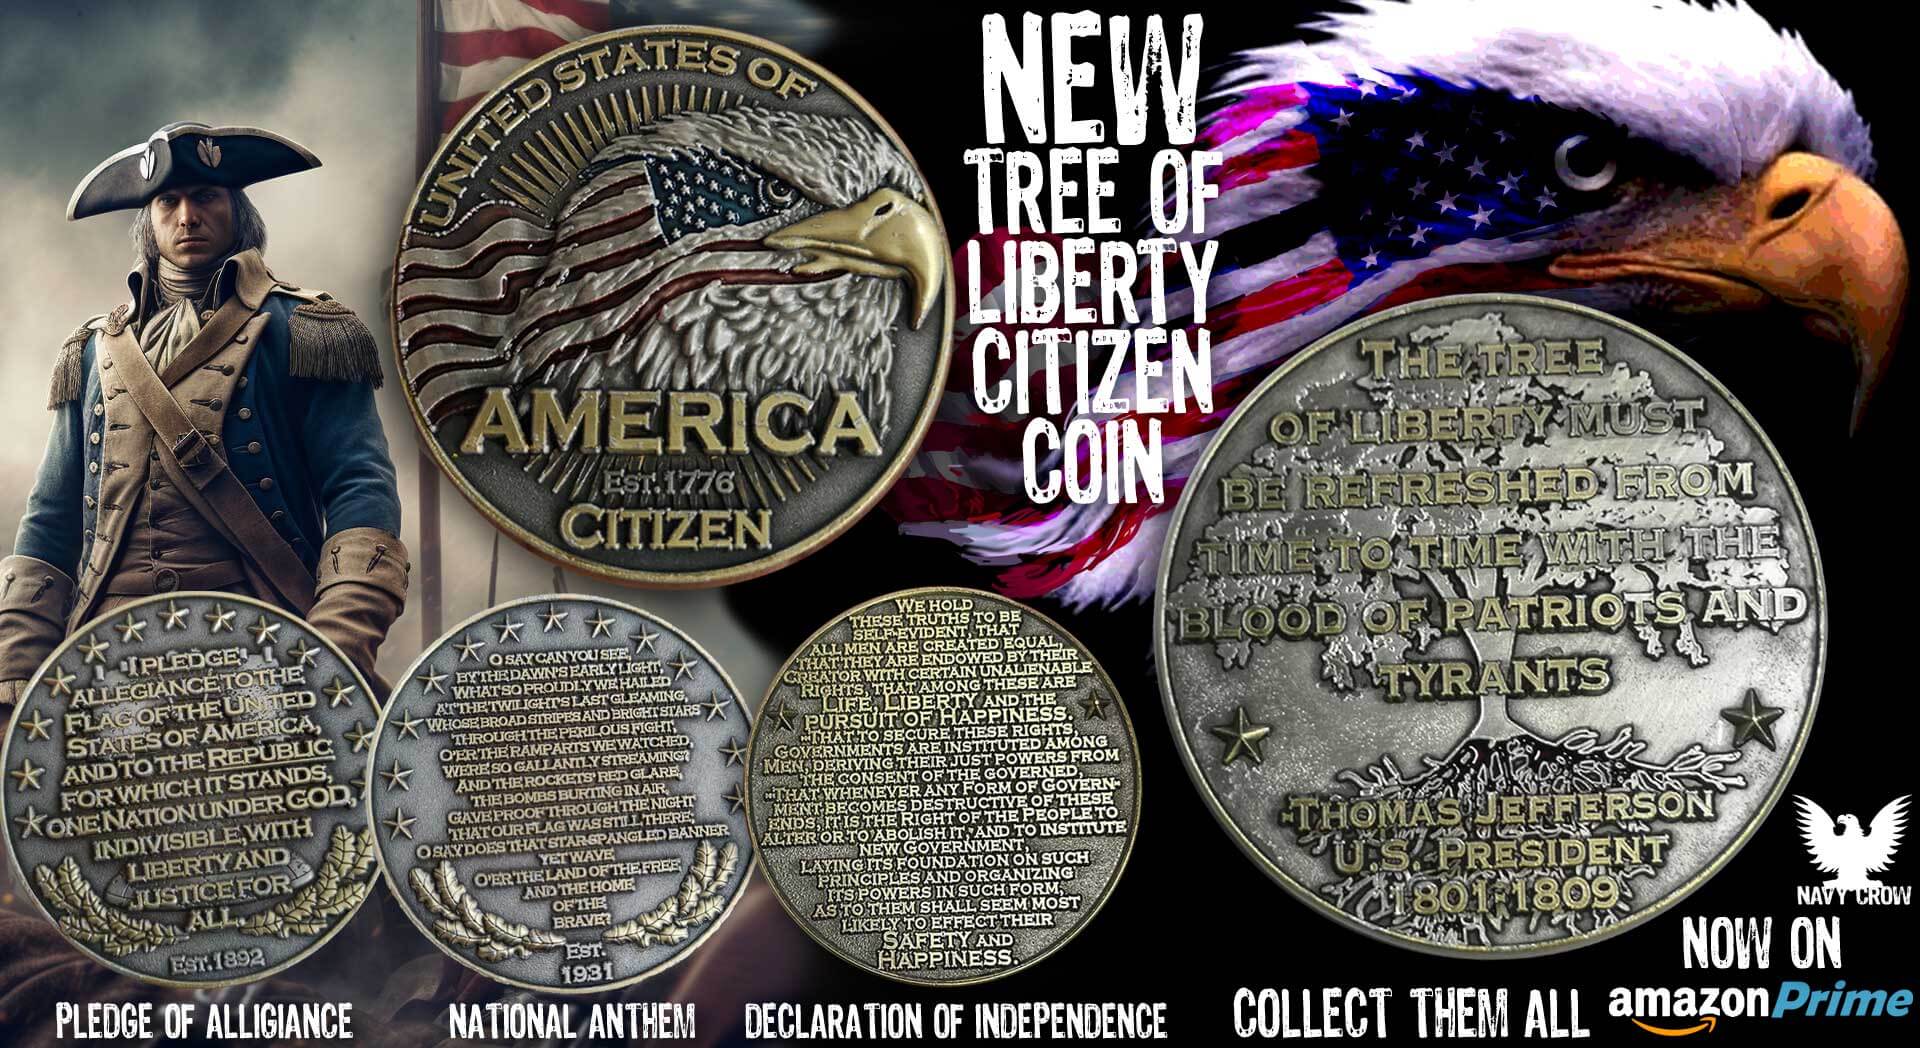 New Tree of Liberty Citizen Coin